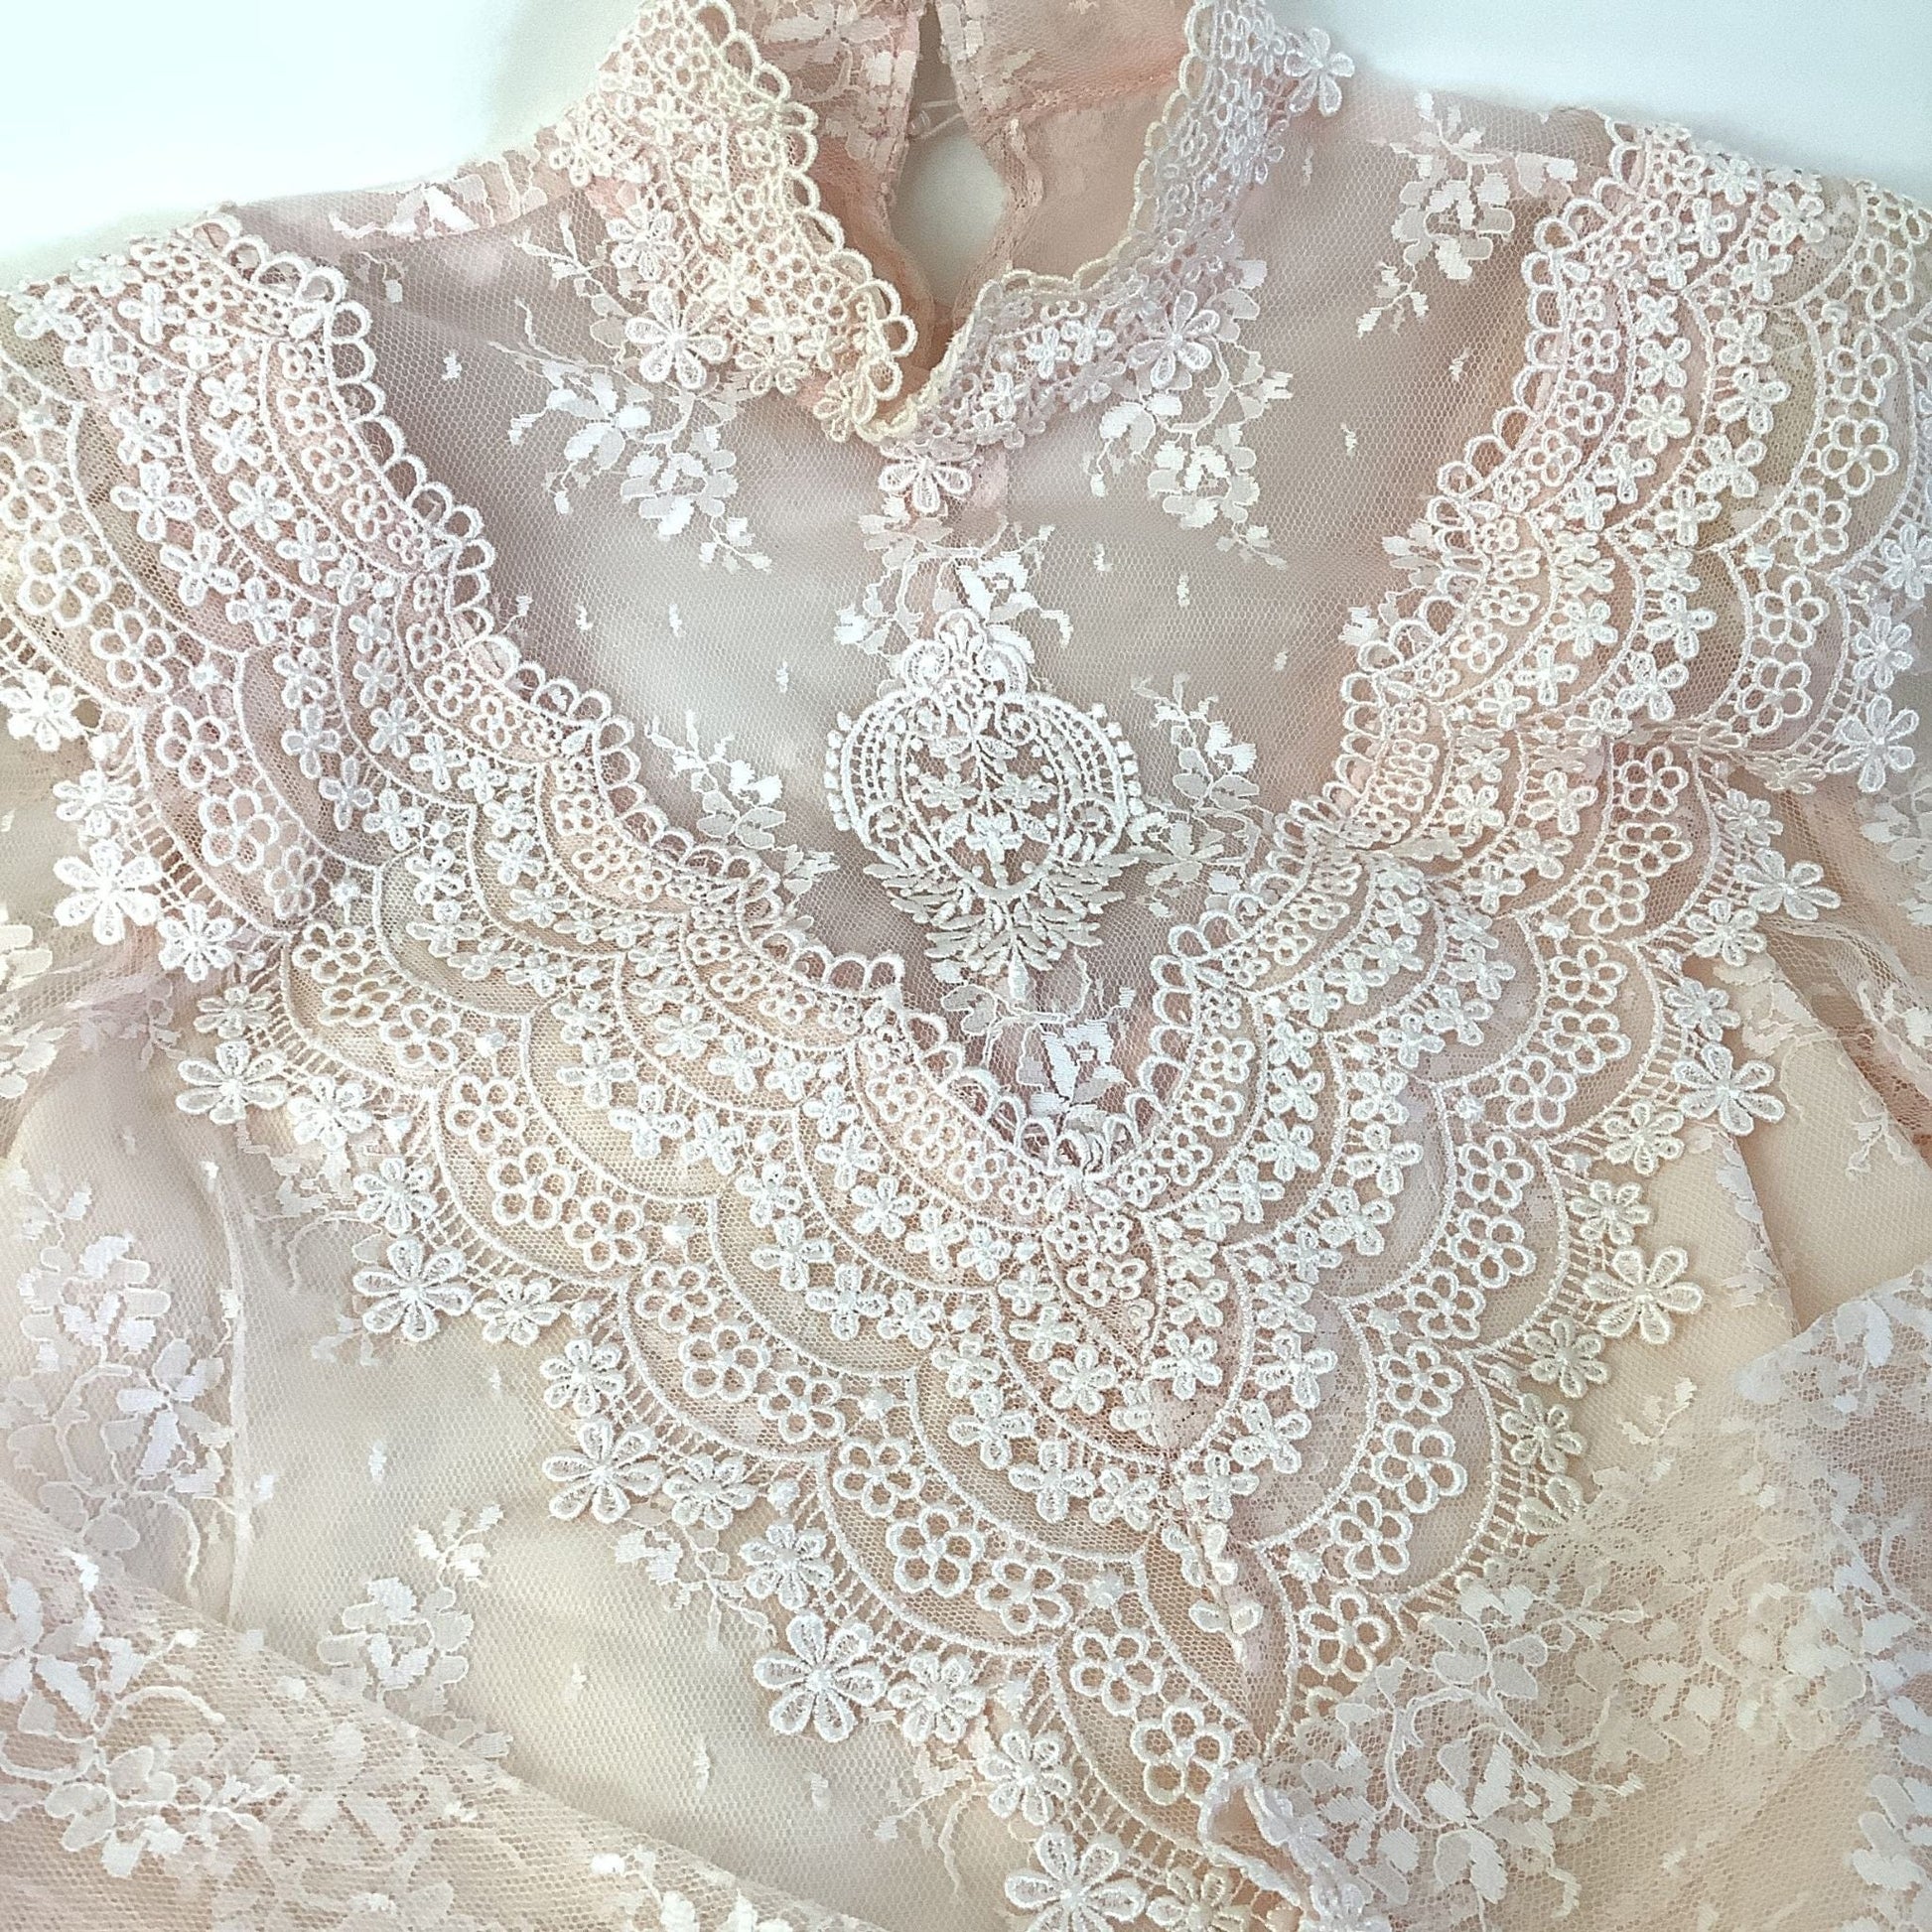 1980s Pink Victorian Lace Top Small / Pink / Vintage 1980s